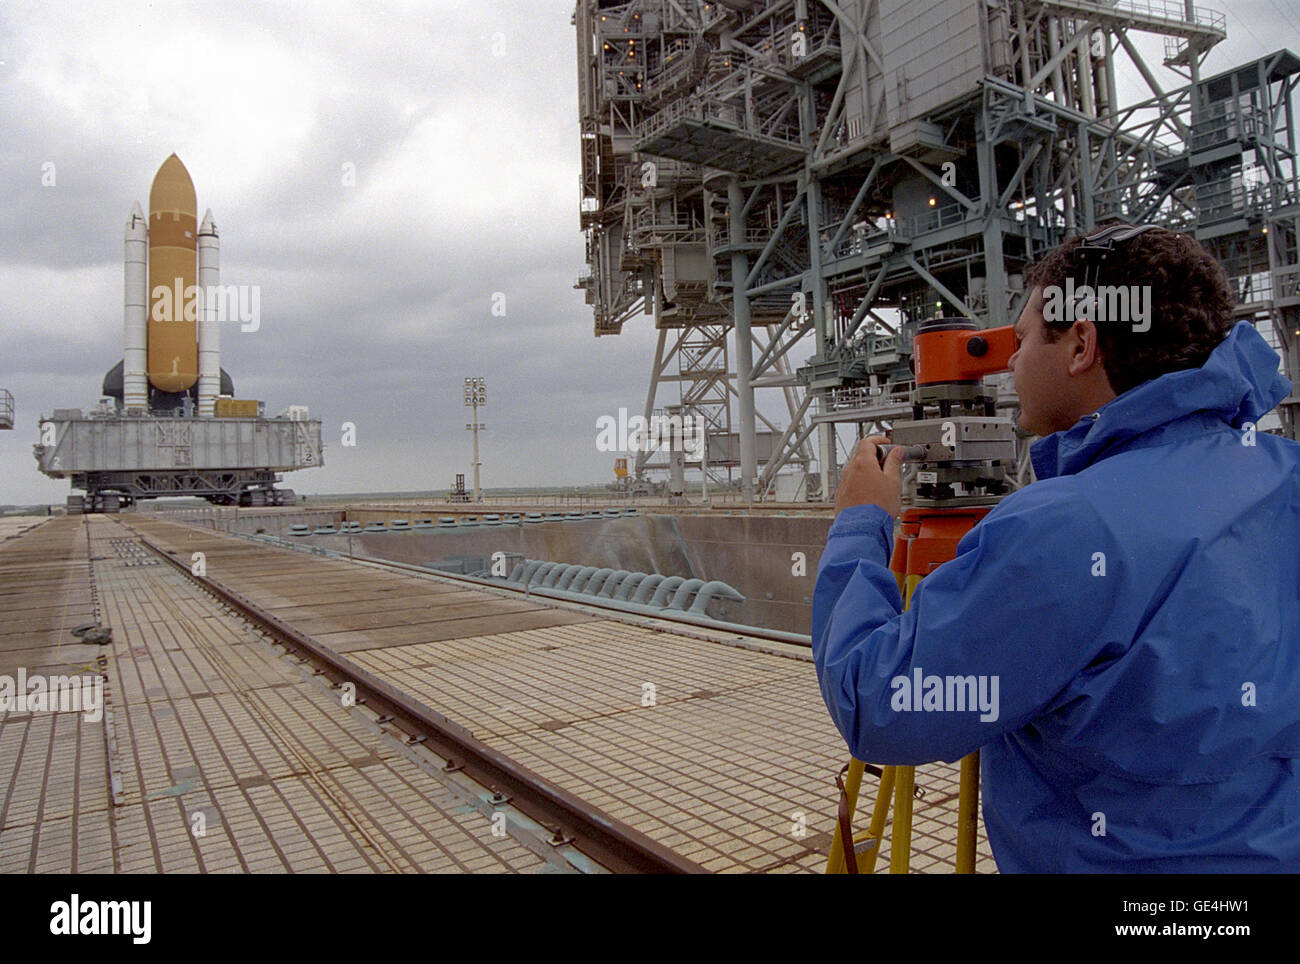 Ed Muktarian, a structural engineer with Lockheed Space Operations Co., is assisting with the docking of the Space Shuttle Endeavour at Launch Pad 39B. Muktarian is using a surveying instrument called a zenith nadir plummet to properly align survey plates located both on the pad surface and the mobile launch platform (MLP), which rests atop the crawler and supports the Shuttle. The north-south positioning provided by the plummet is used in conjunction with the east-west alignment accomplished with the highly precise laser docking system on the crawler. Muktarian communicates through his headse Stock Photo